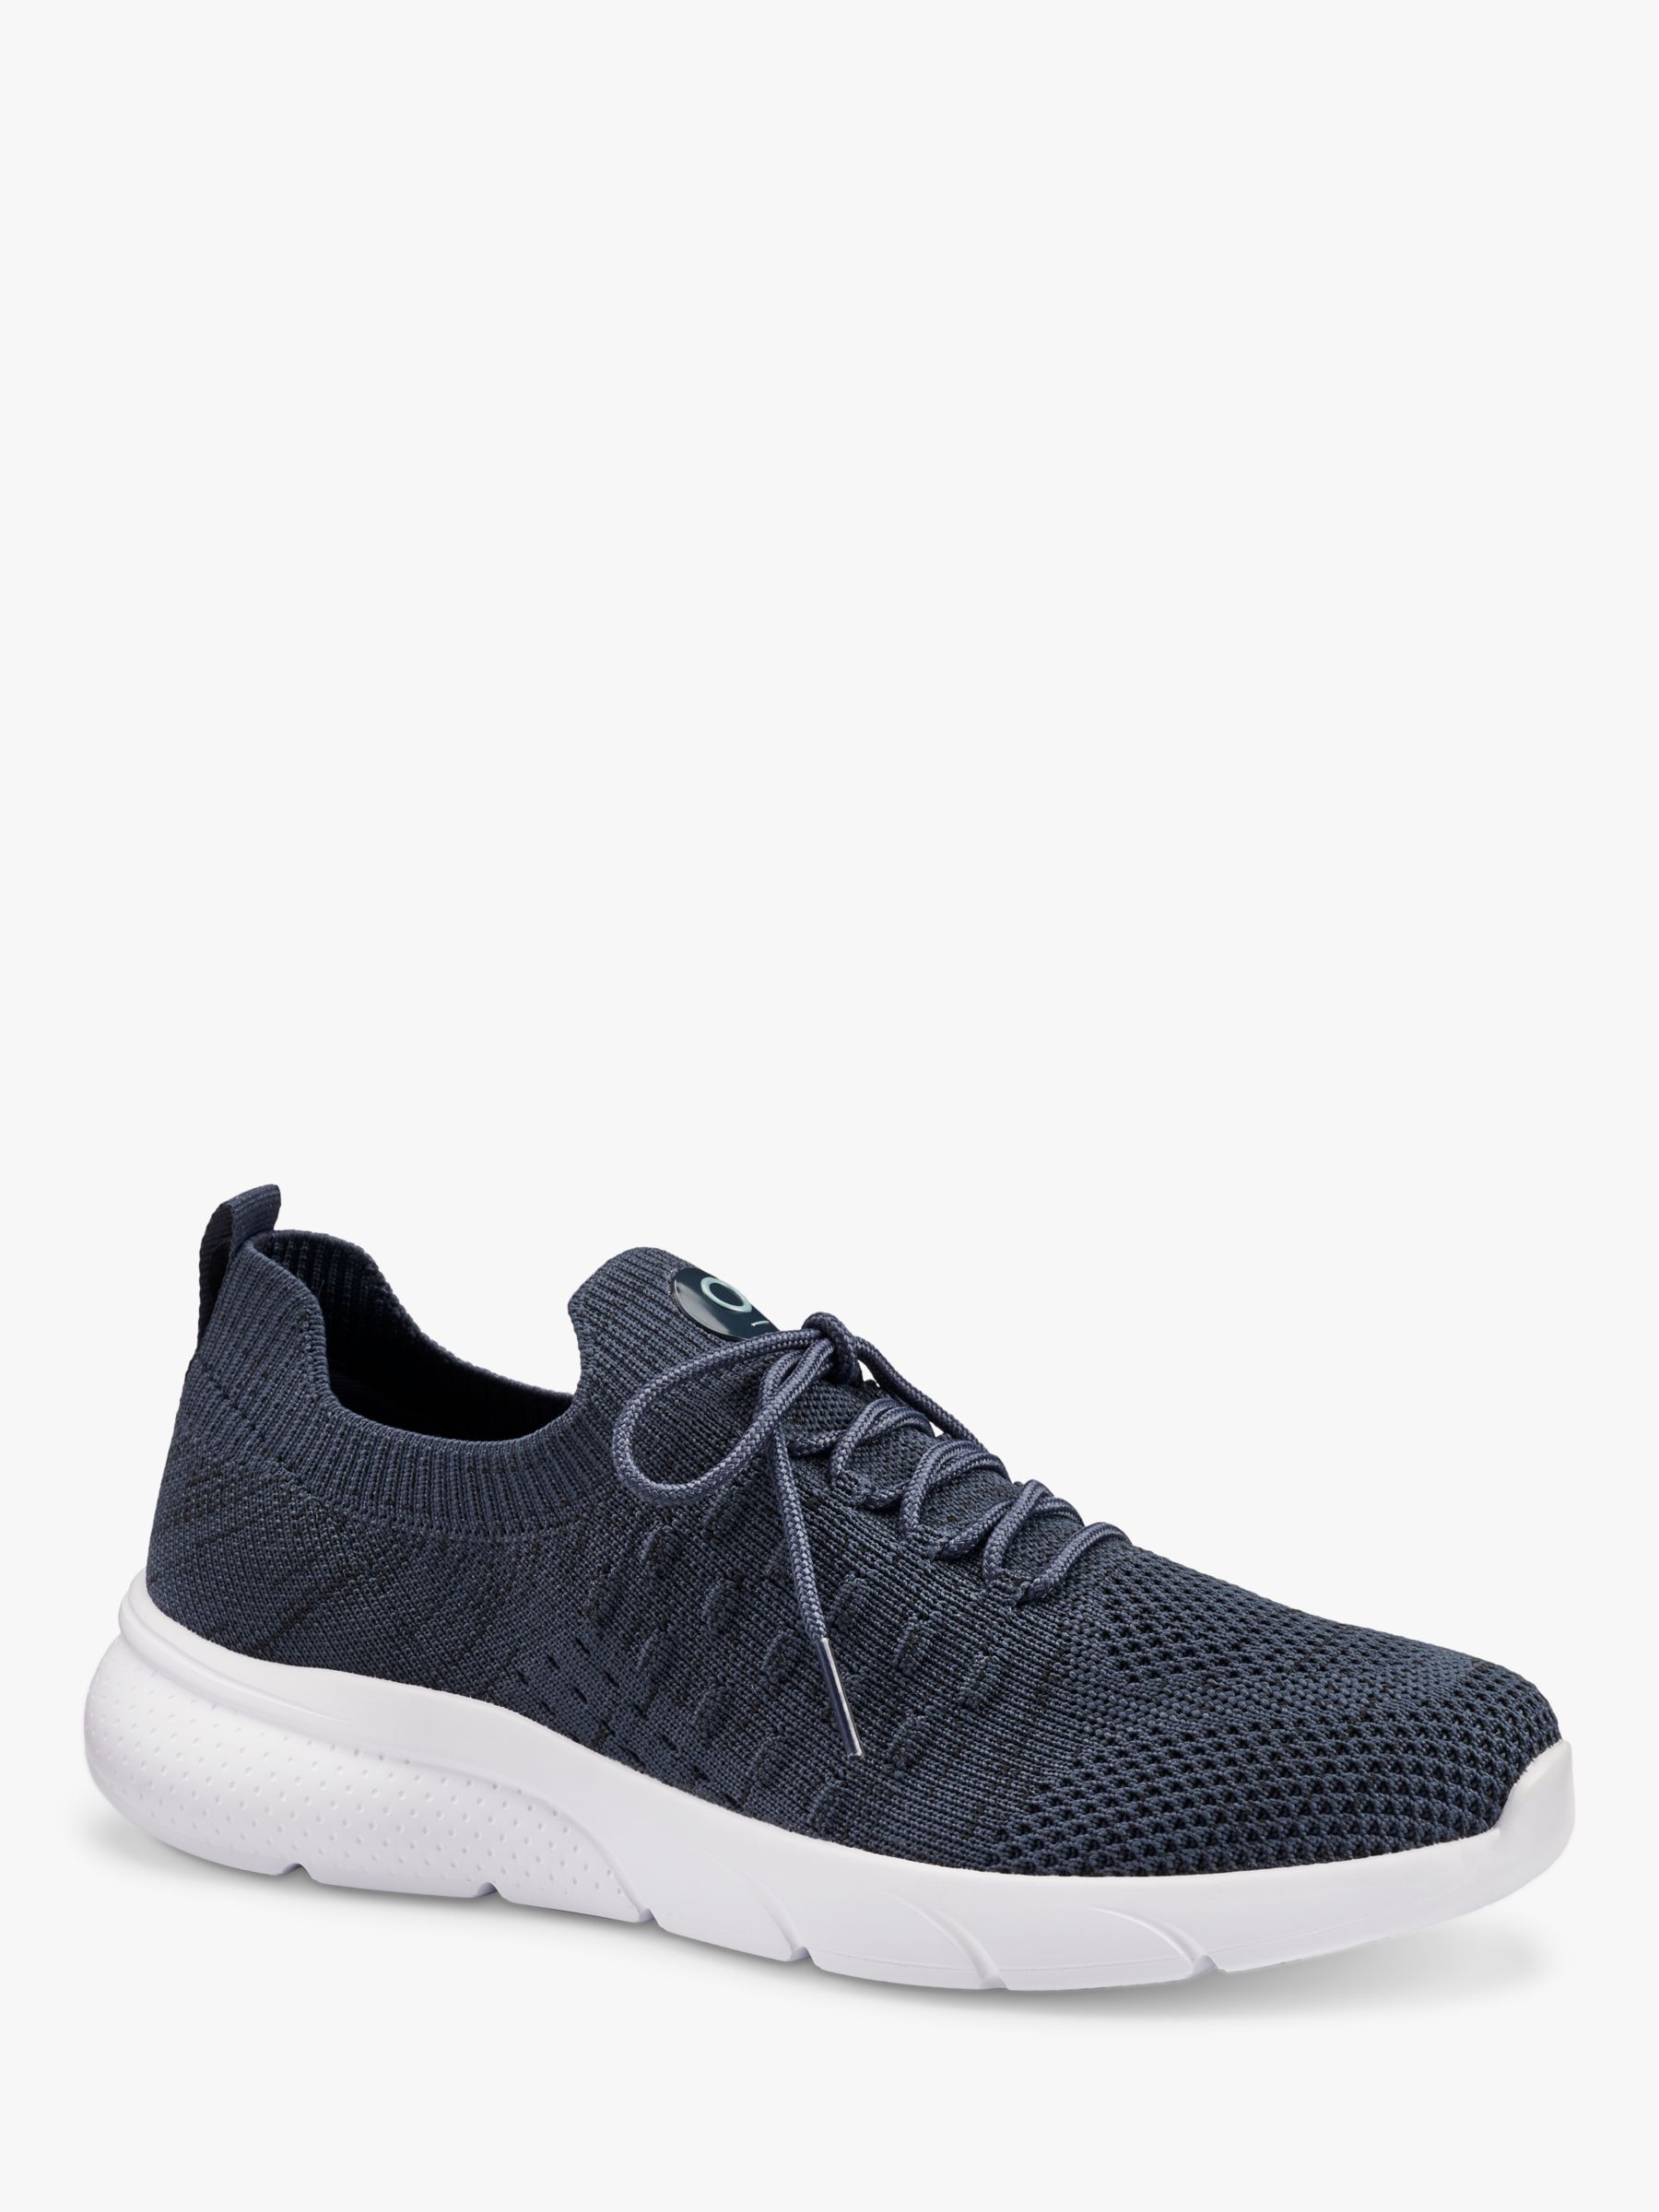 Buy Hotter Defy Knitted Lightweight Trainers Online at johnlewis.com